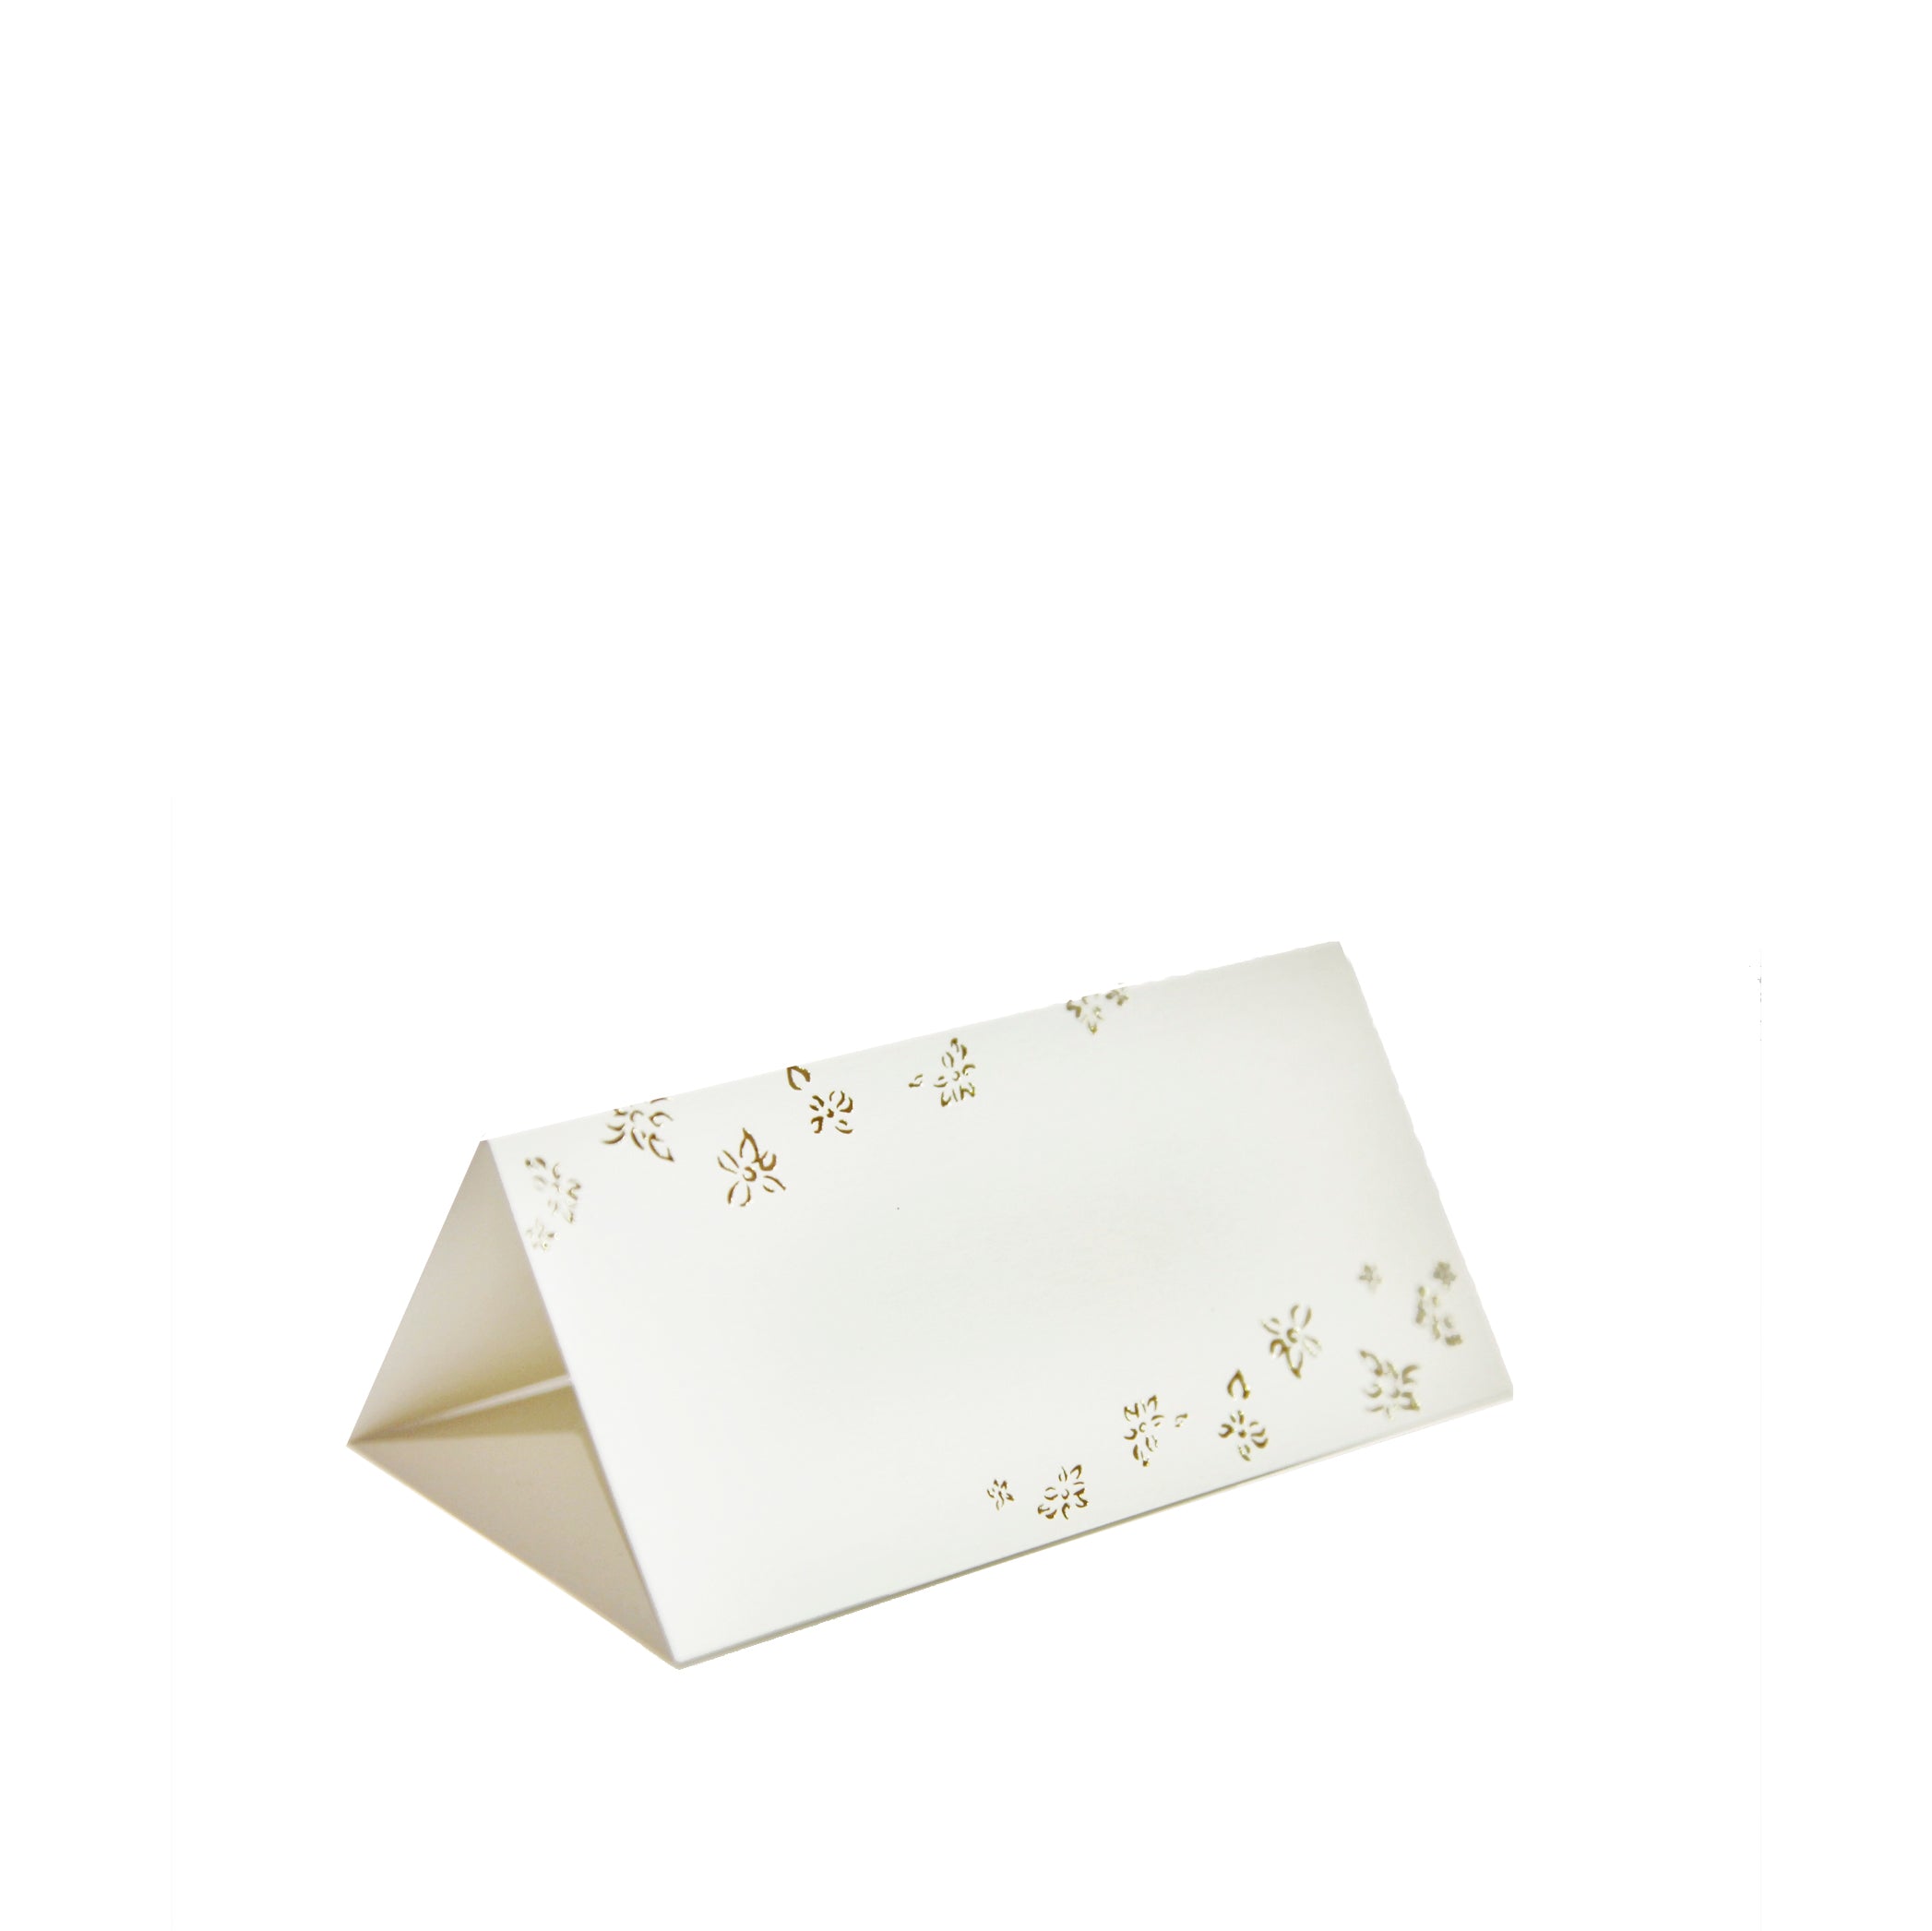 Summerill & Bishop Gold Foiled Falling Flower Place Card, Packet of 12